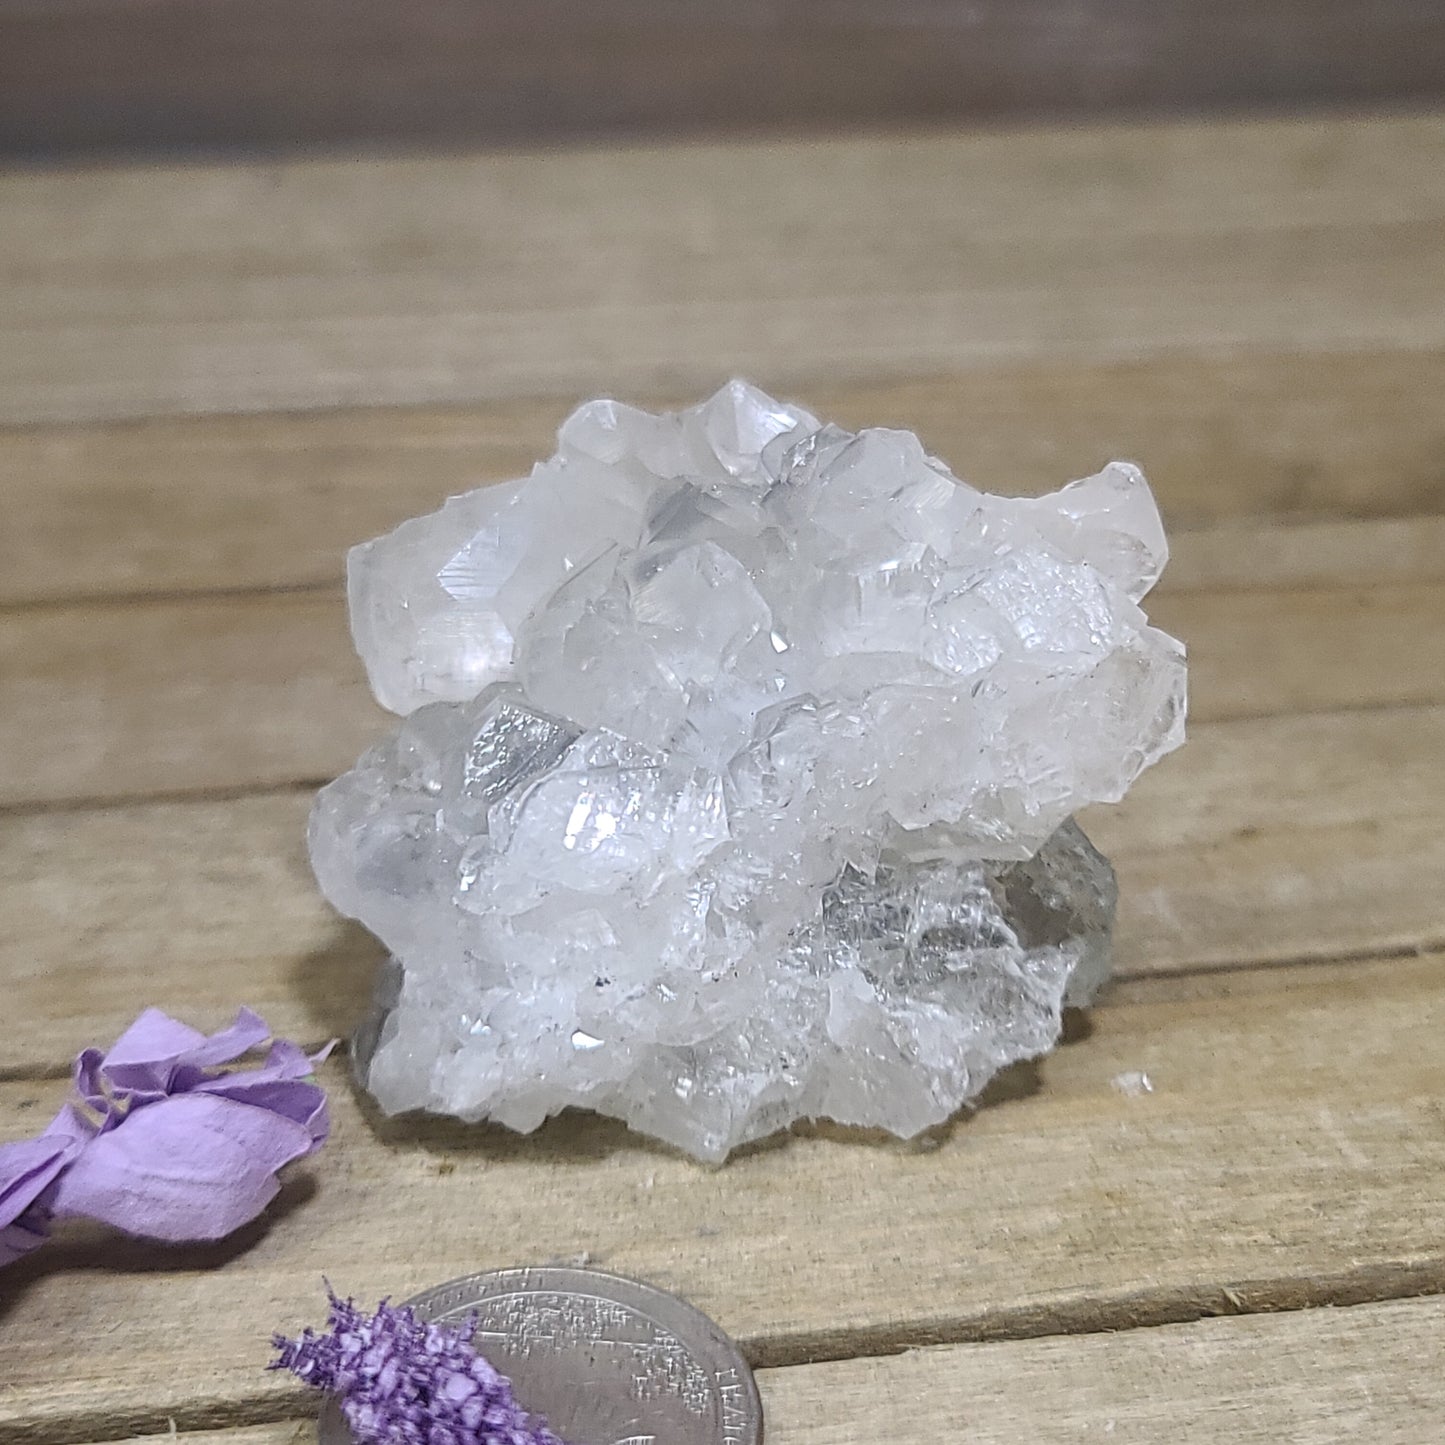 Diamond Calcite Natural Clusters on Green Apophyllite